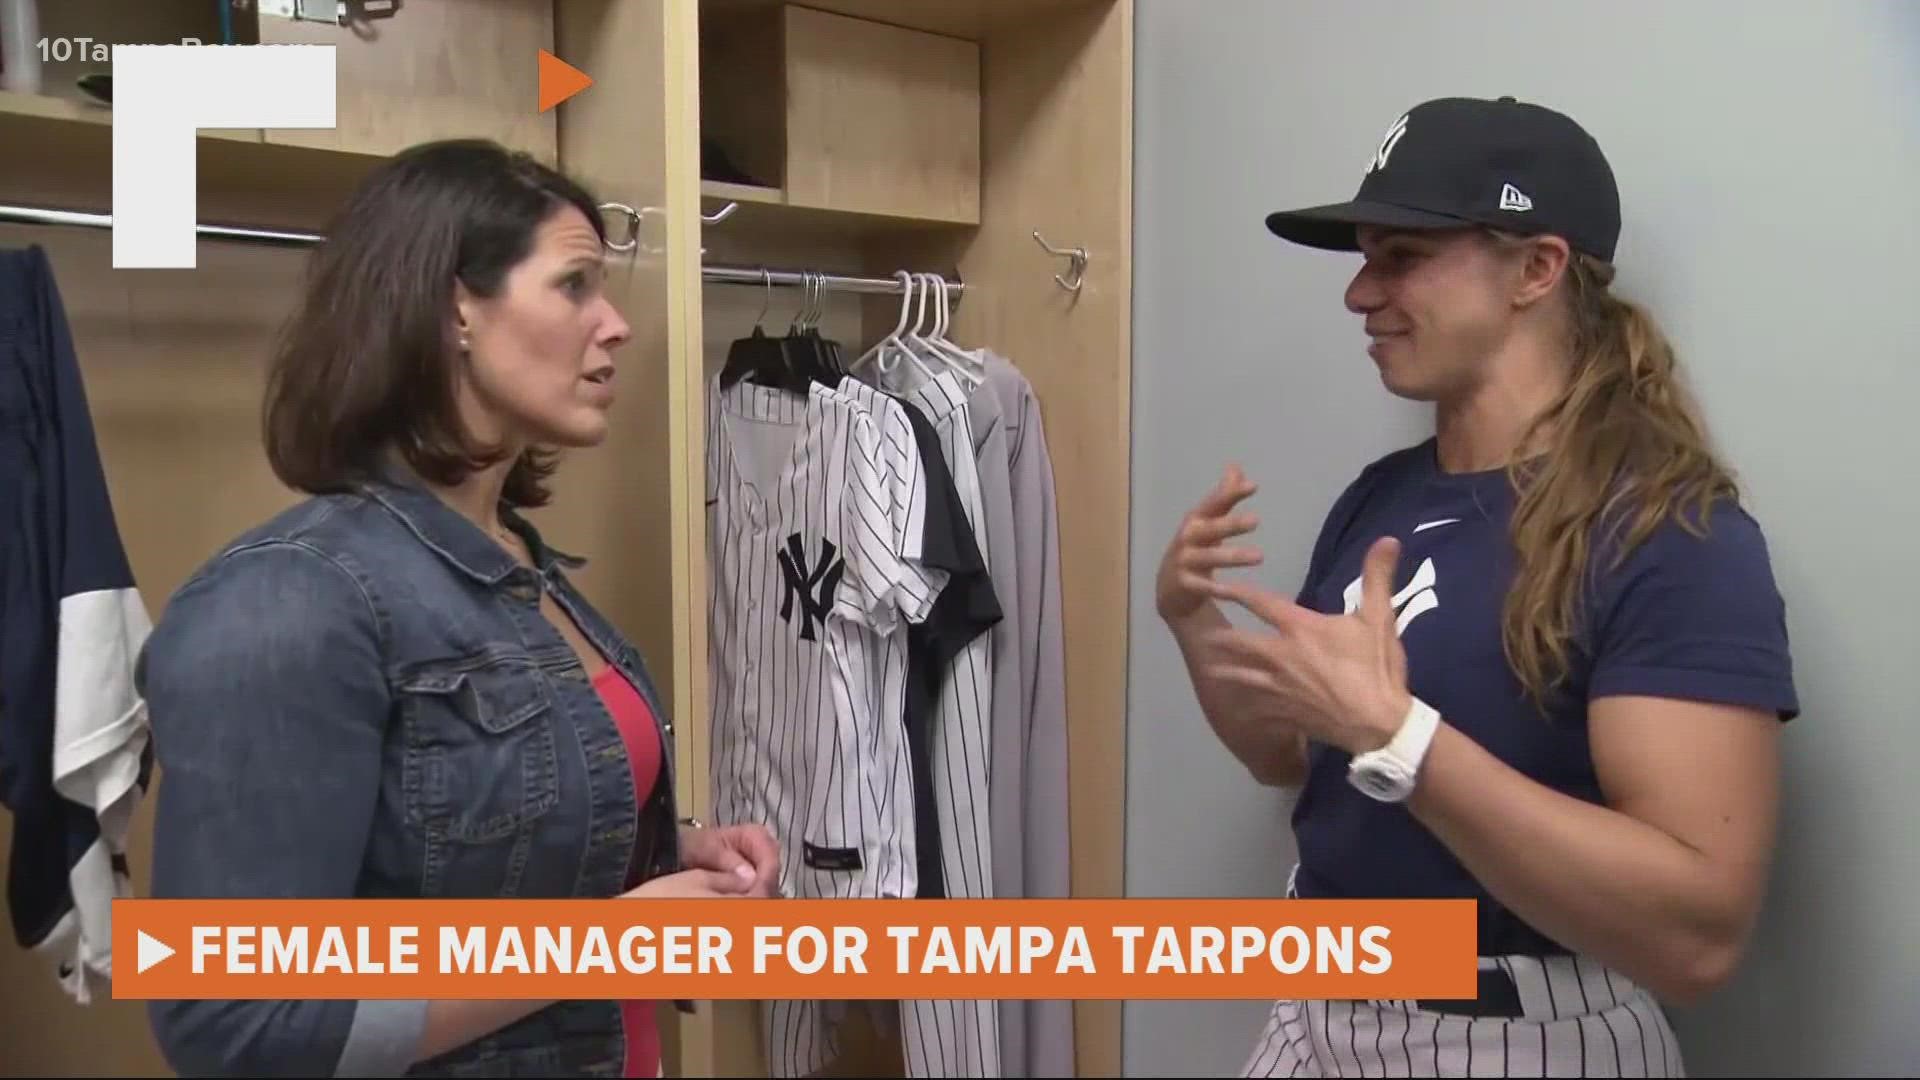 She's set to manage the Tampa Tarpons, the Low A minor league team in the New York Yankees organization.